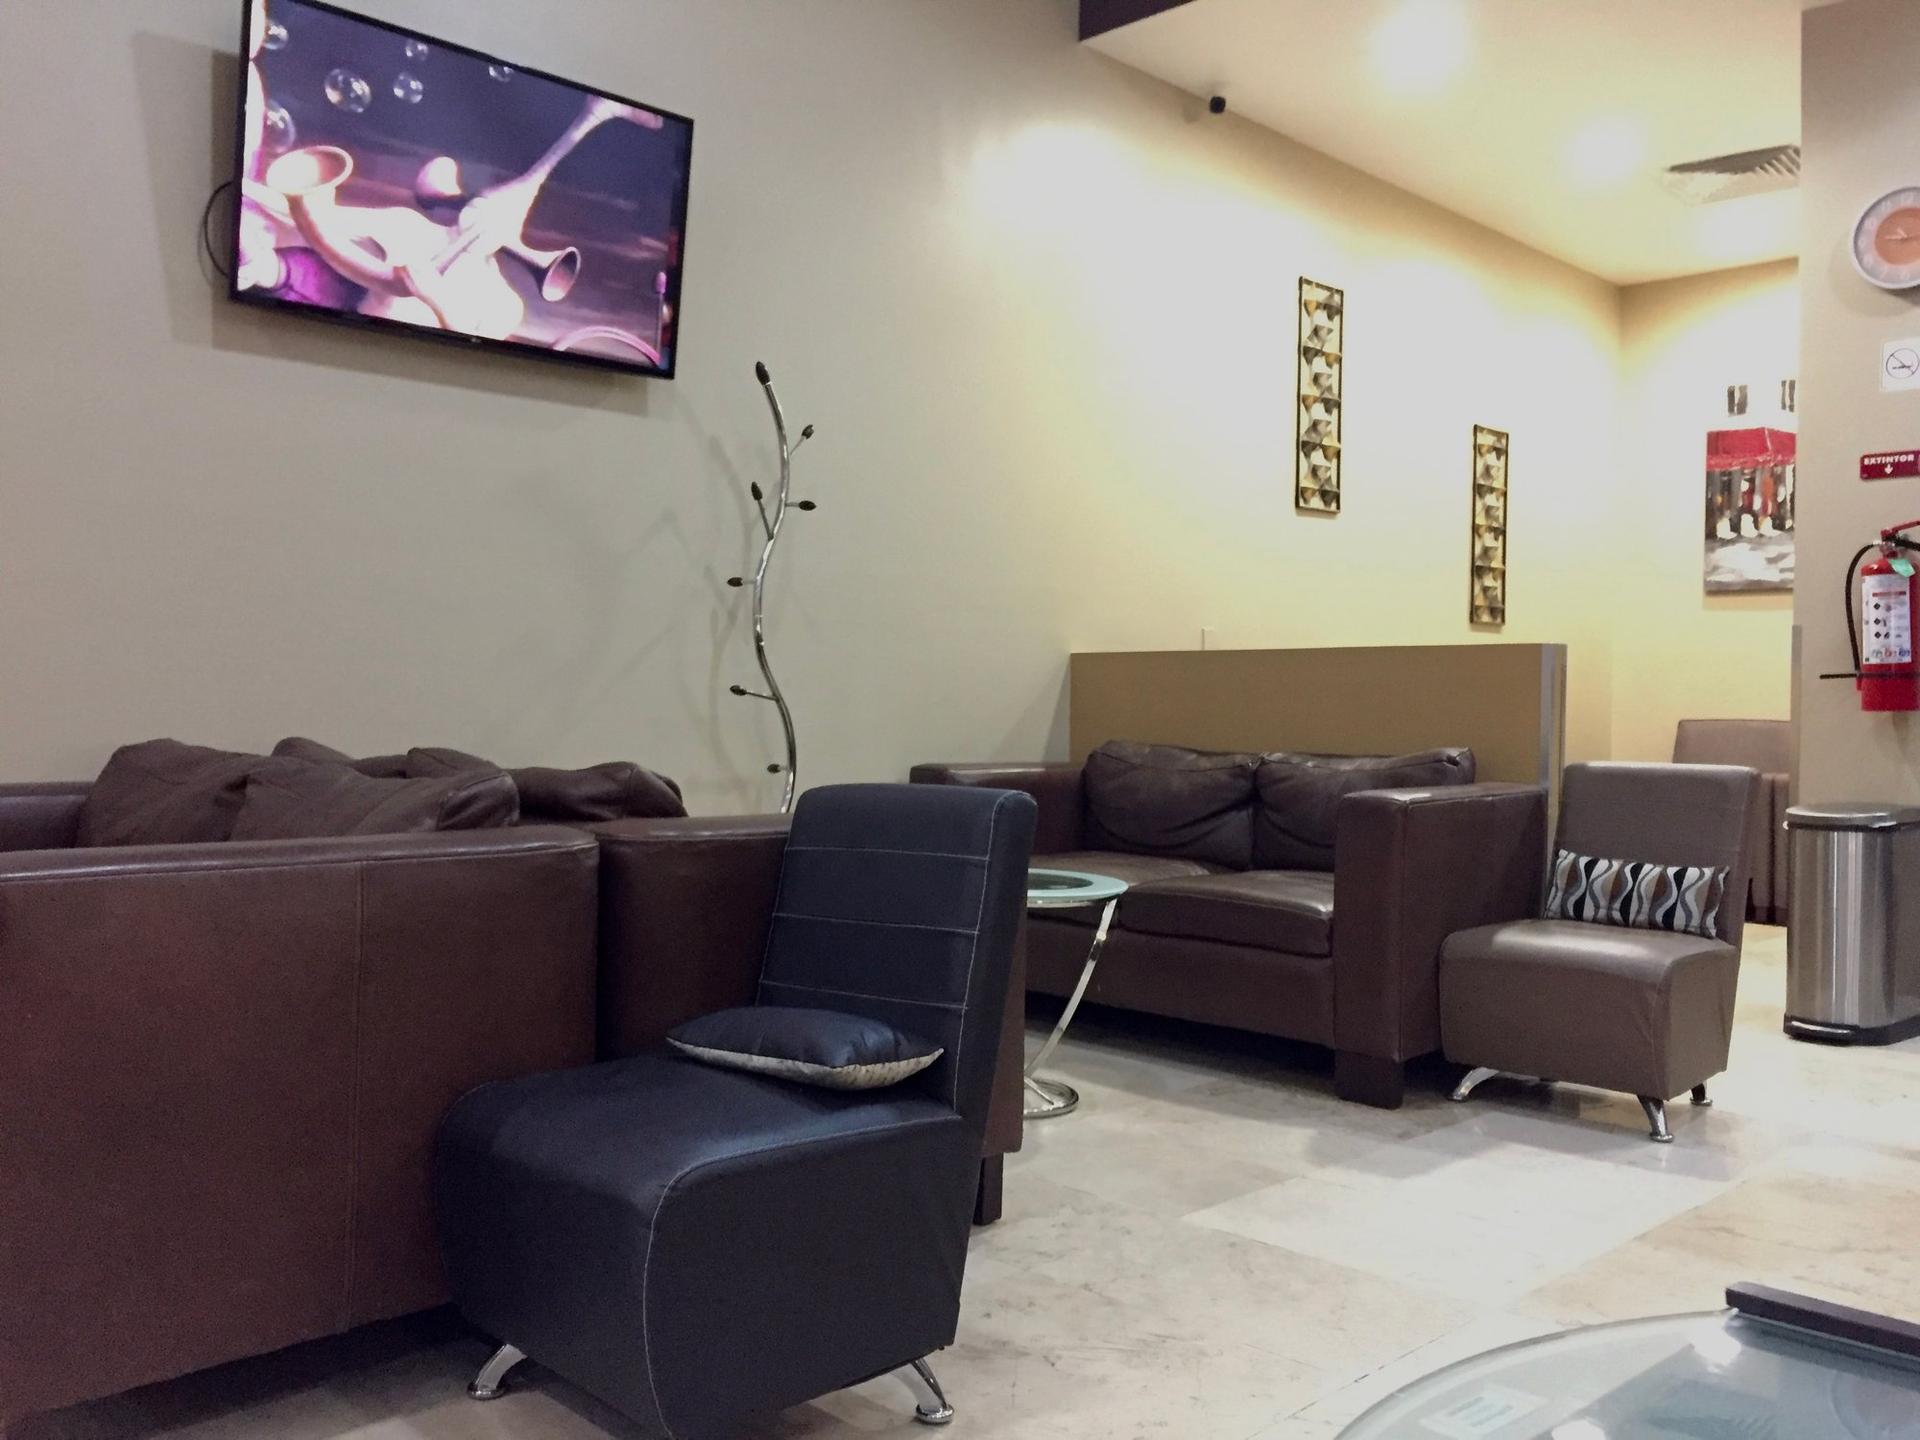 Caral VIP Lounge image 10 of 10